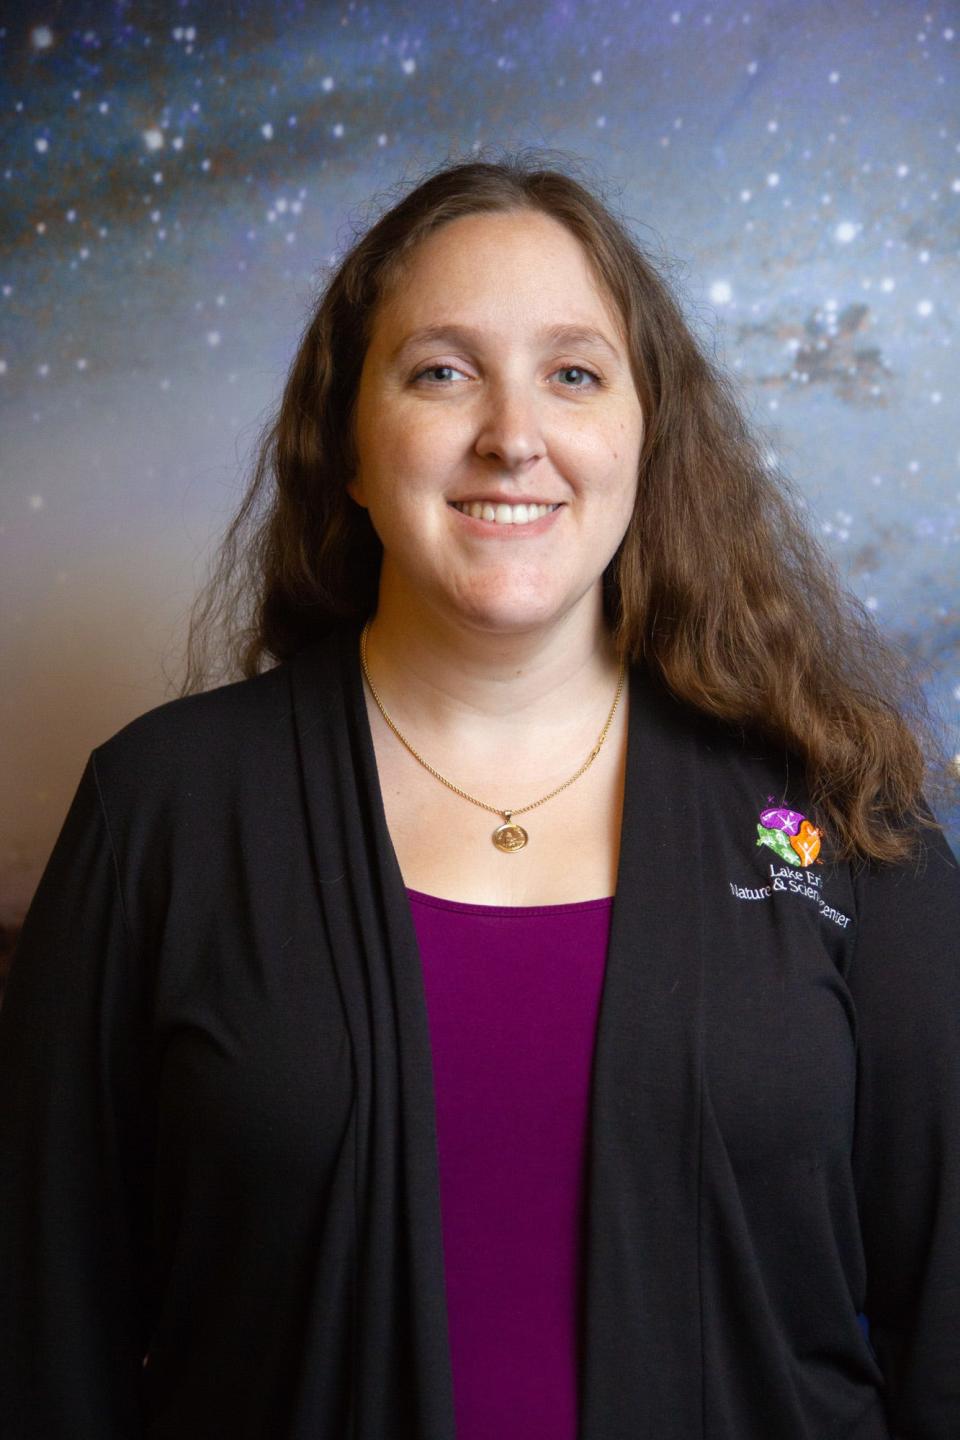 Katy Downing is planetarium and program coordinator at Lake Erie Nature & Science Center in Bay Village, Ohio.